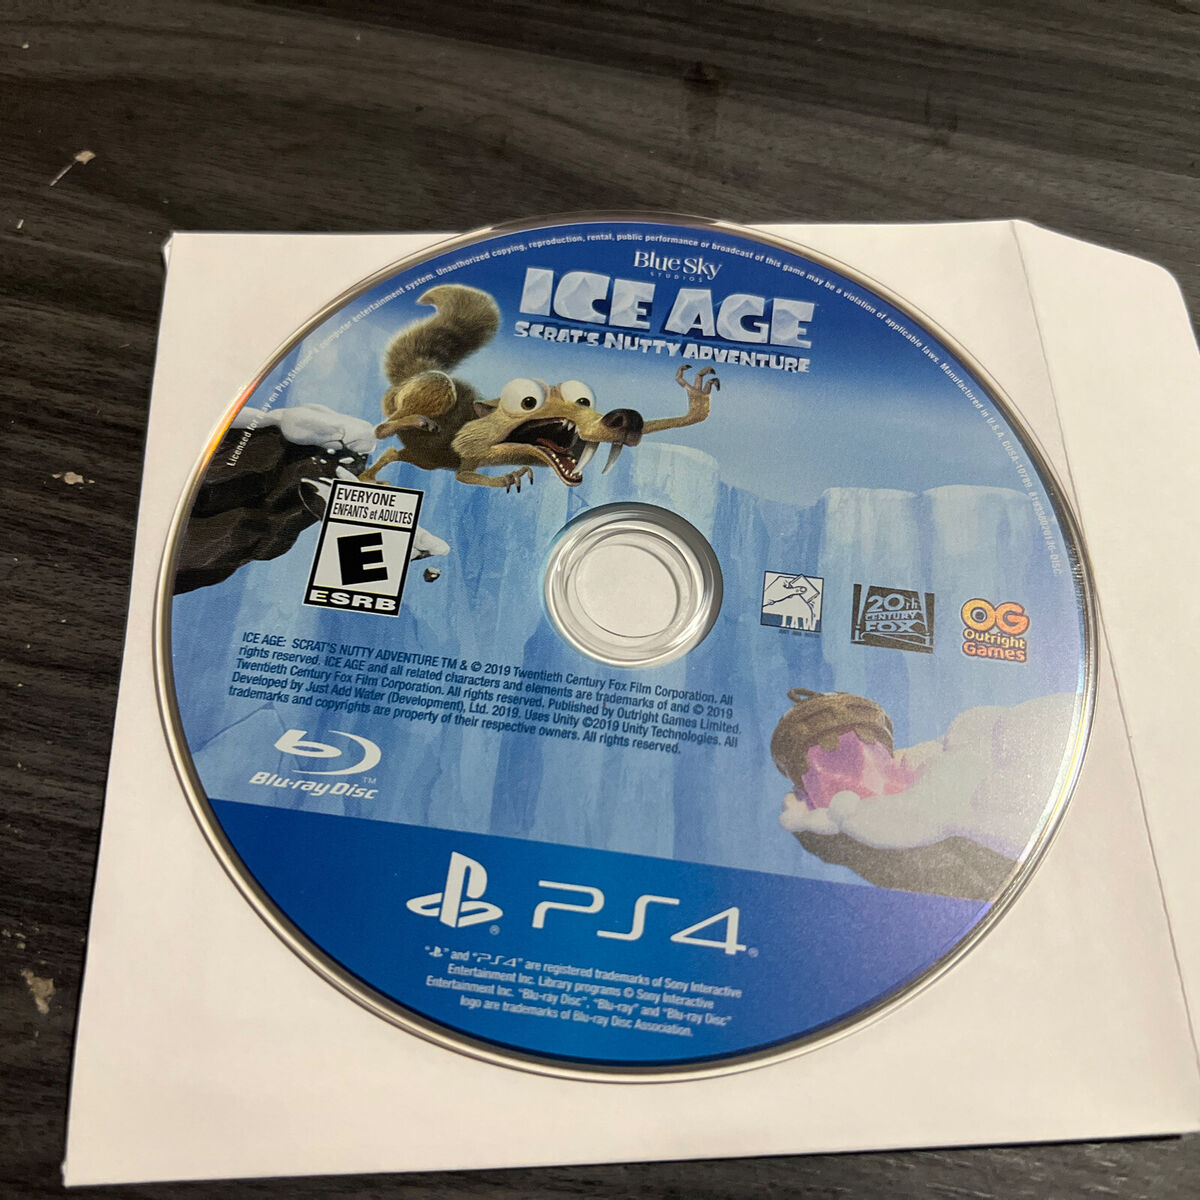 PS4 - Ice Age: Scrat's Nutty Adventure - Used